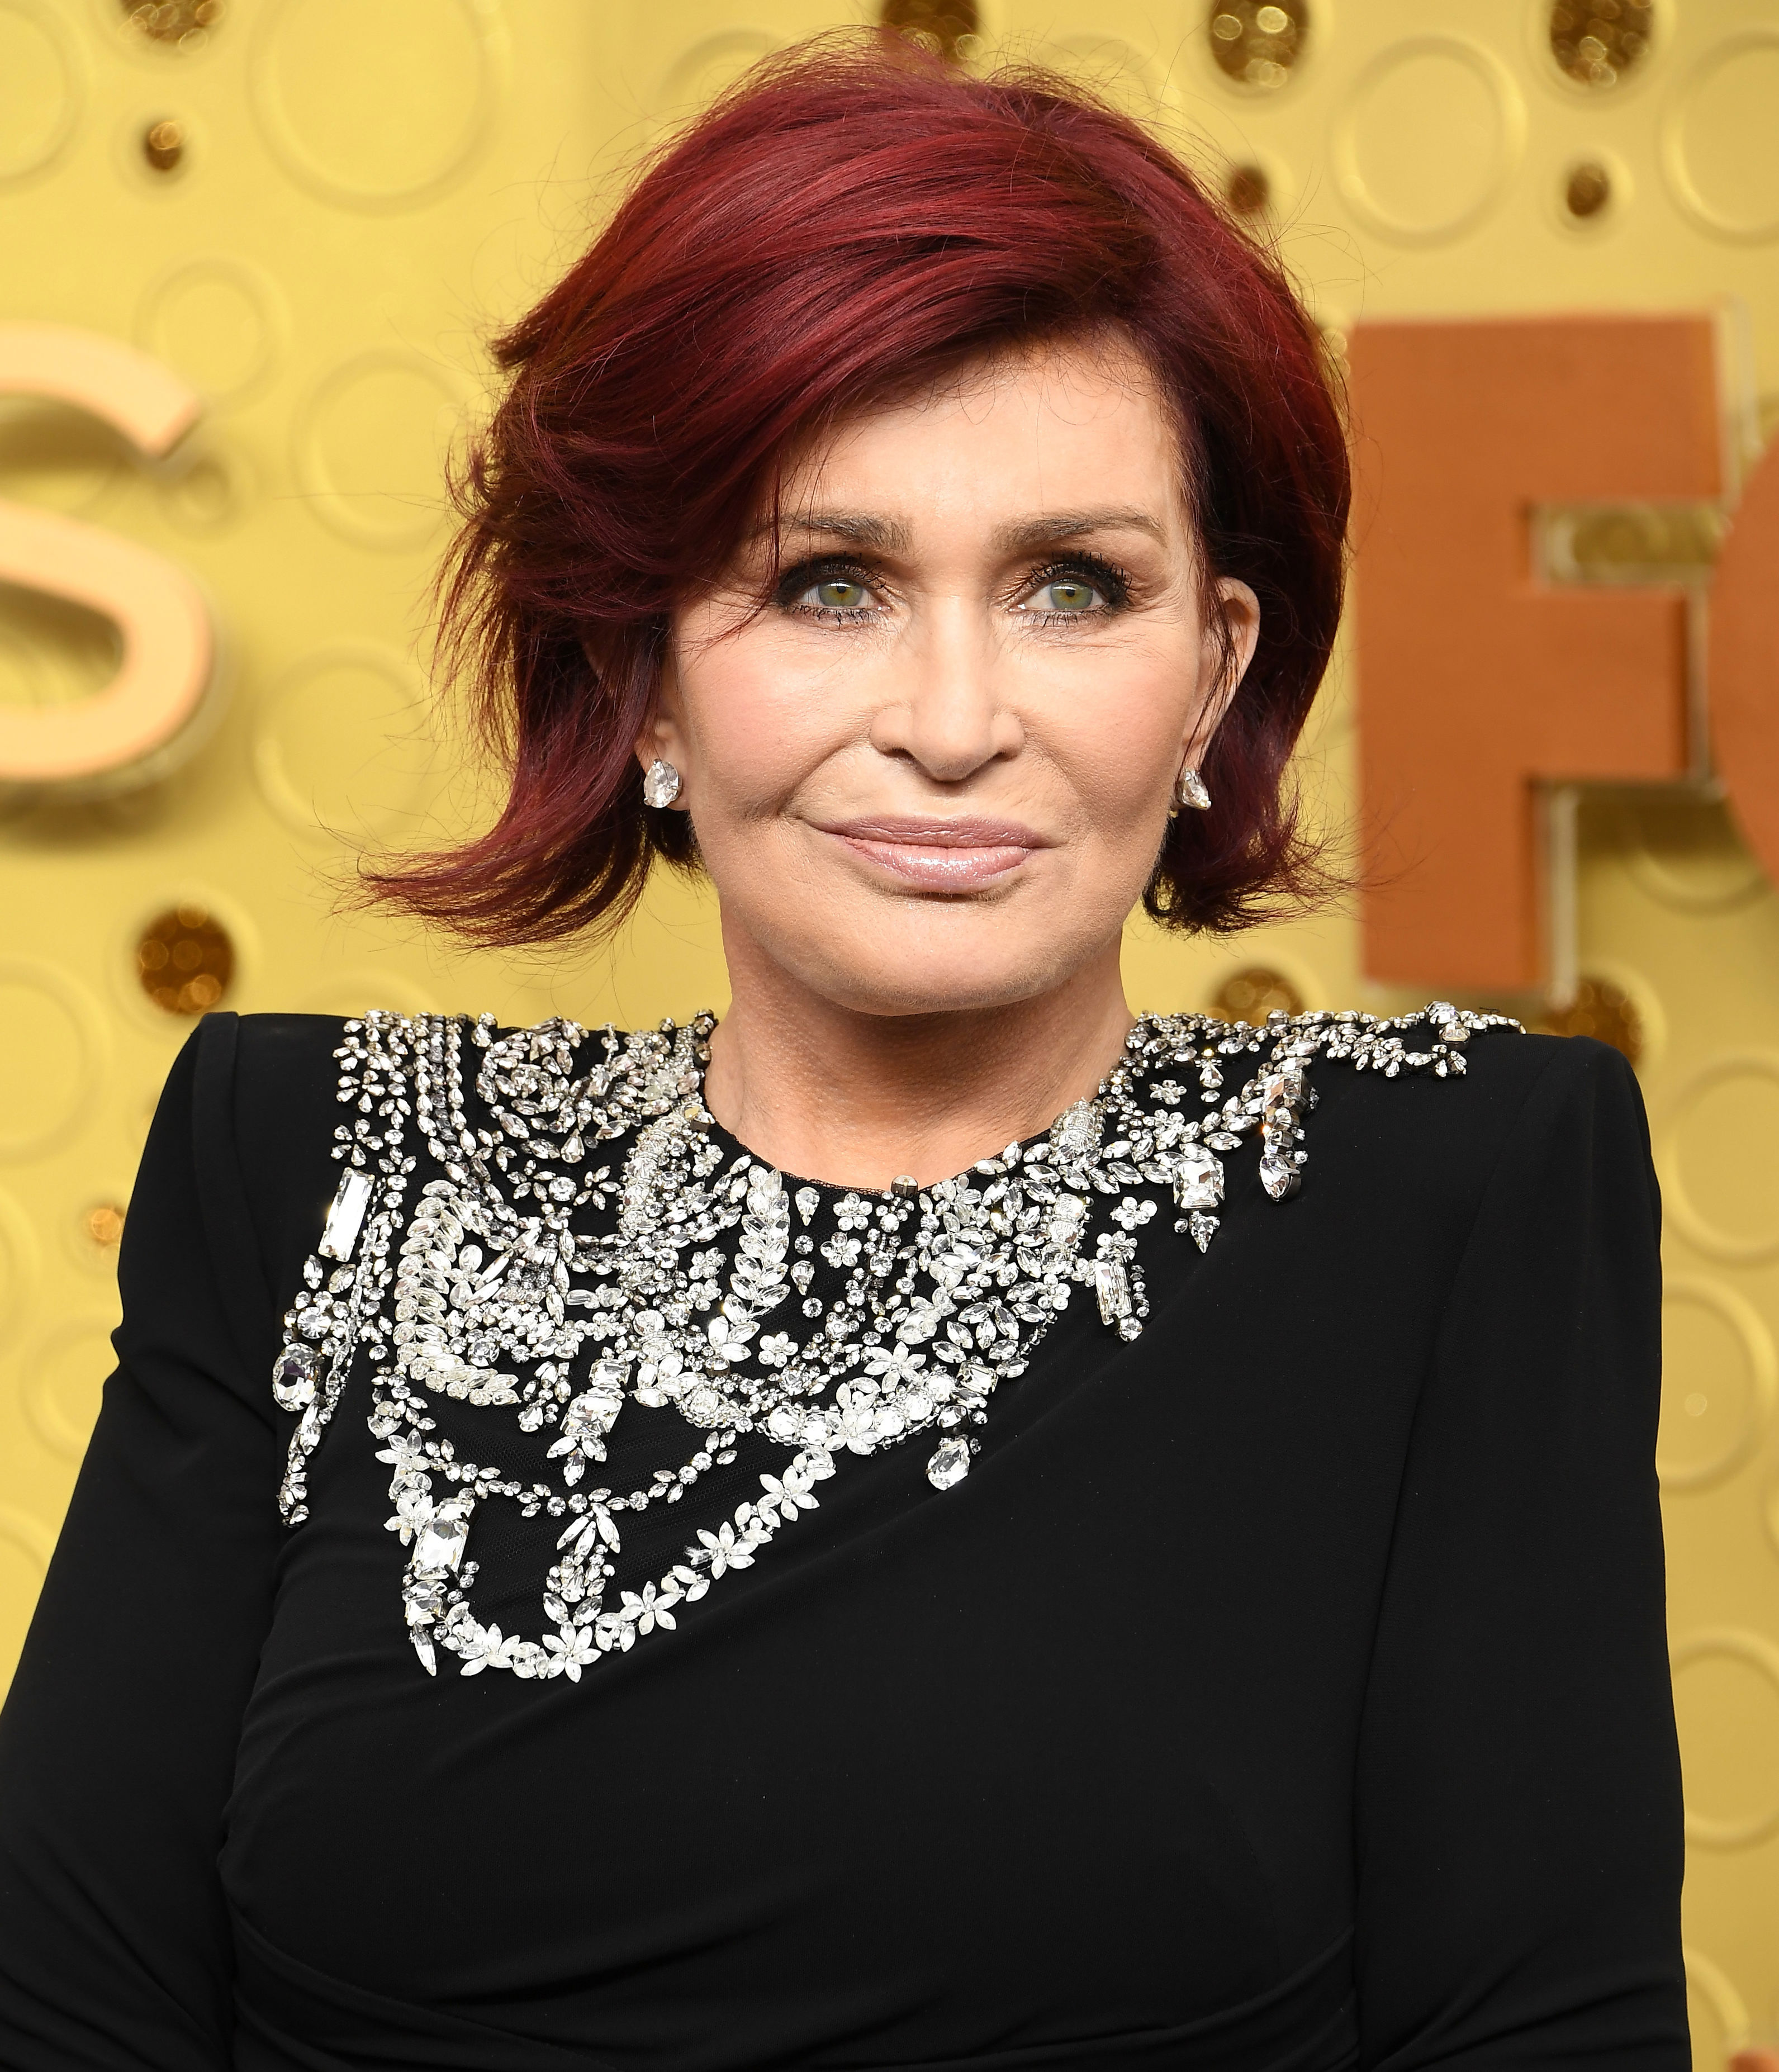 <p><a href="https://www.wonderwall.com/celebrity/profiles/overview/sharon-osbourne-1449.article">Sharon Osbourne</a> debuted the results of a summer facelift on the premiere of the 10th season of "The Talk" in September 2019 just five weeks post-op. She then showed off her new look on the red carpet at the <a href="https://www.wonderwall.com/awards-events/emmys/2019-emmy-awards-see-all-photos-red-carpet-3021170.gallery">2019 Emmys</a> days later (pictured). Sharon happily told viewers what she'd had done at 66: "I had my neck done, my jowls... [My surgeon] kind of pulled it from the top of my head and put an elastic band in it,'' she explained. "But everything was just lifted up. So it looks more refreshed." But just two years later, she had ANOTHER facelift, believed to be her fifth...</p>